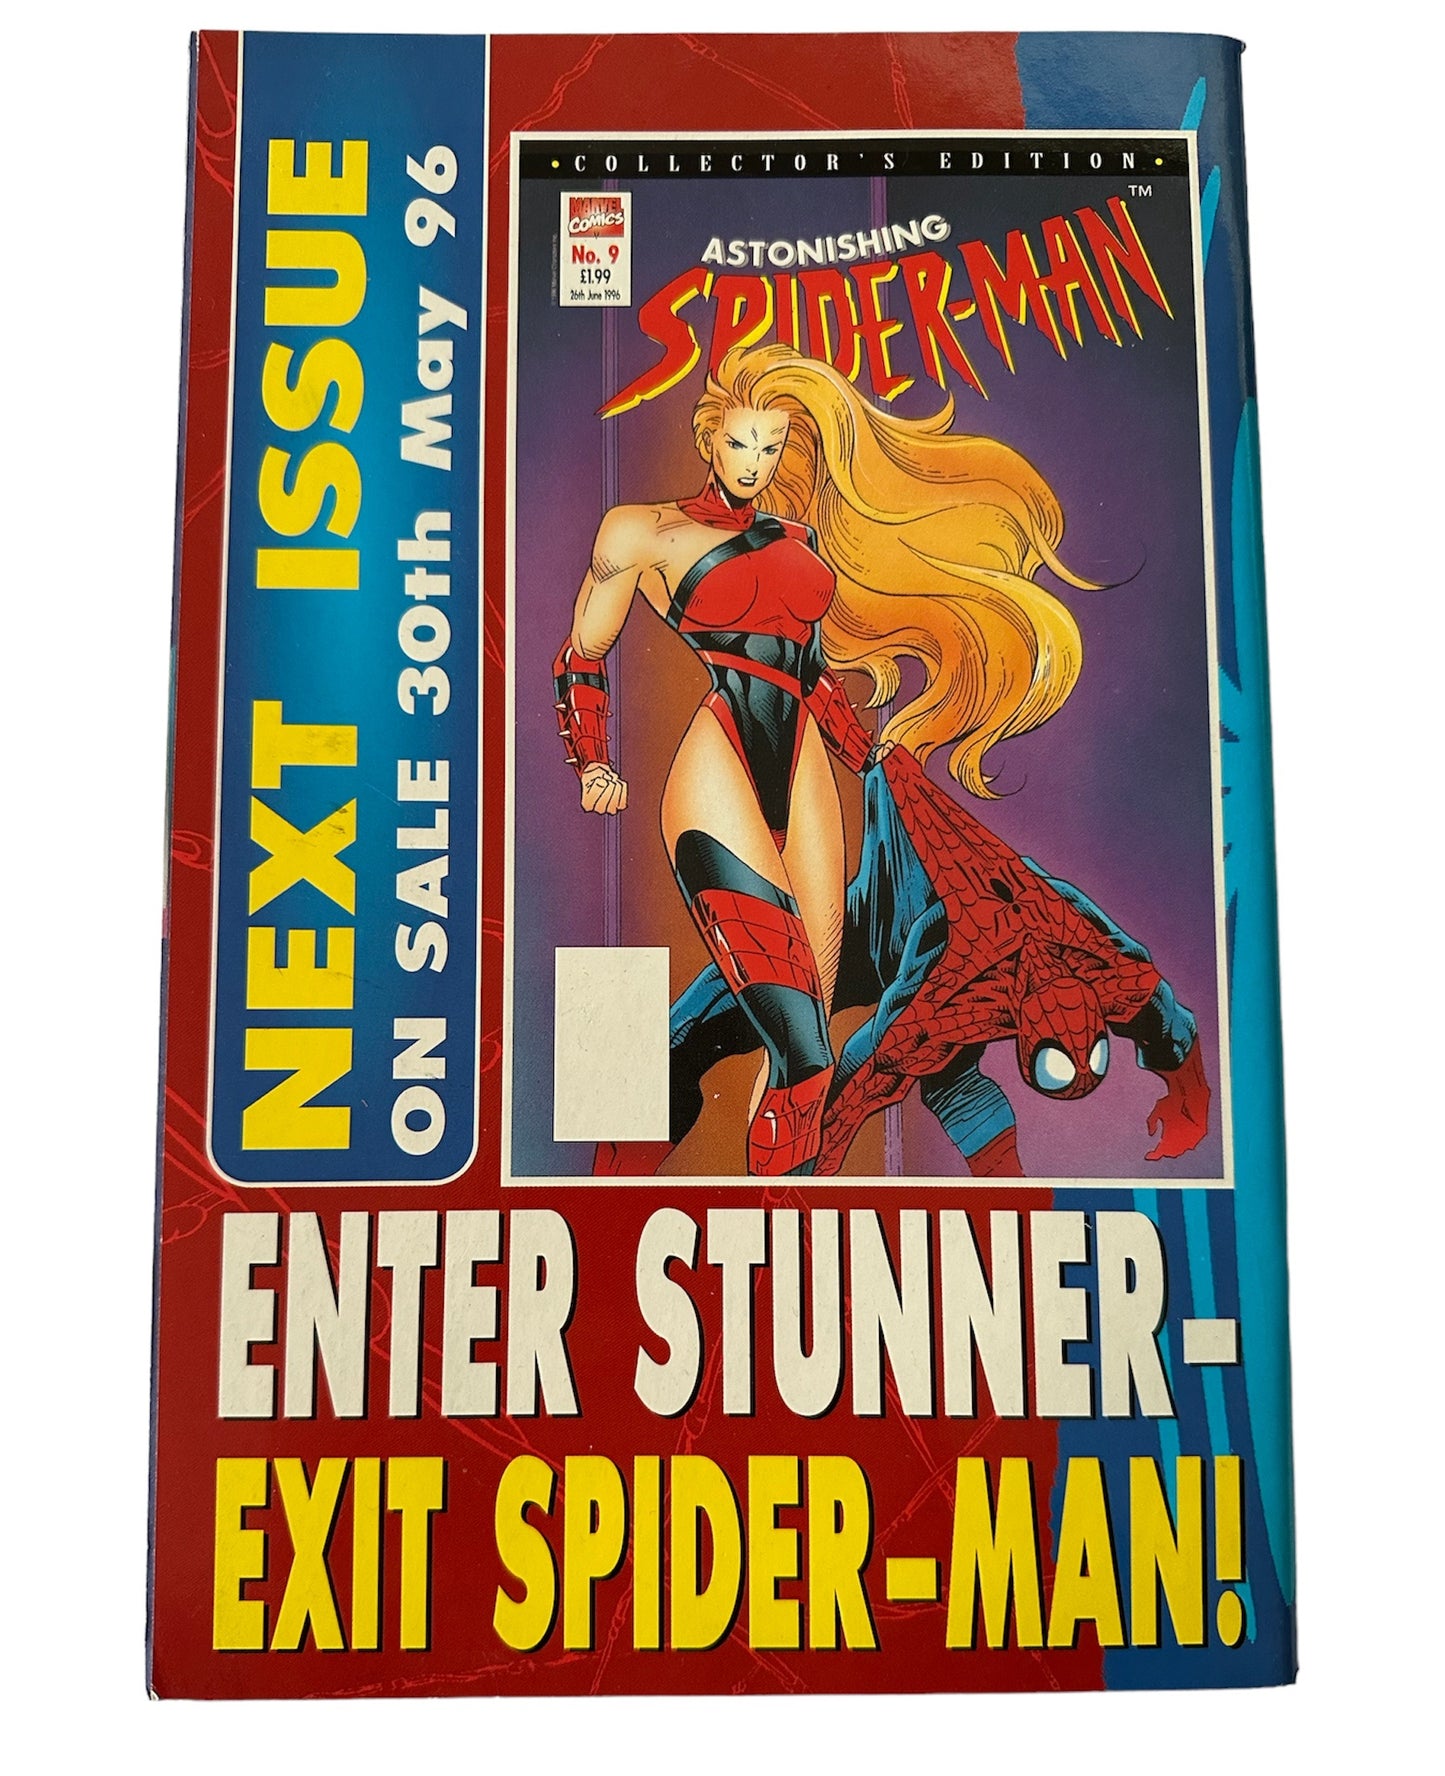 1996 Marvels Astonishing Spiderman Monthly Comic Number 8 - Collectors Edition - 29th May 1996